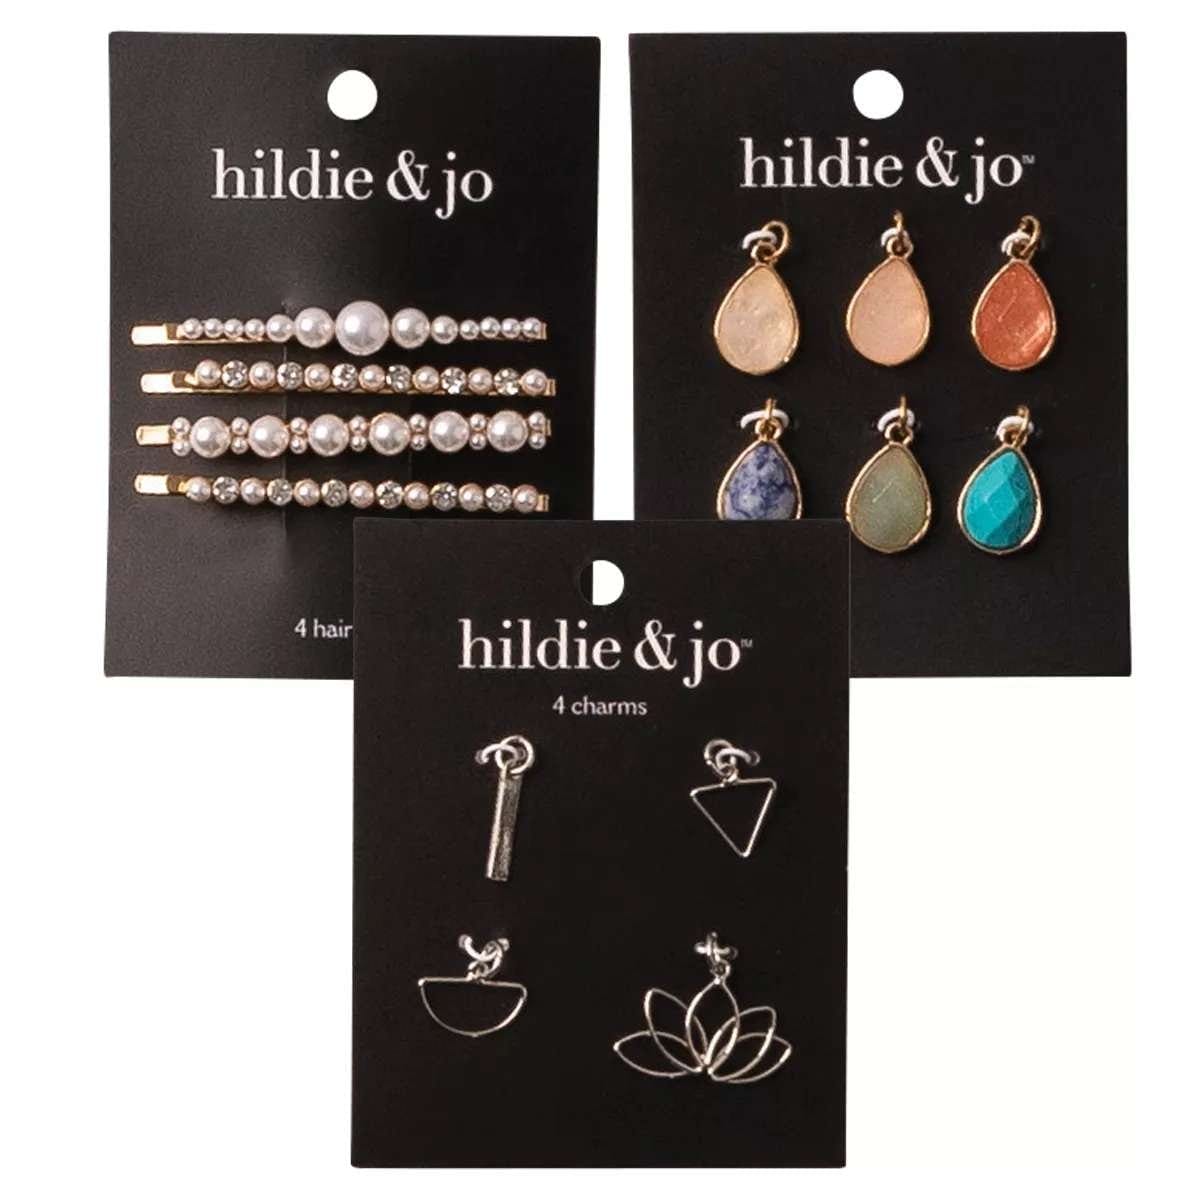 hildie and jo Pendants, Charms, Finished Jewelry and Hair Accessories